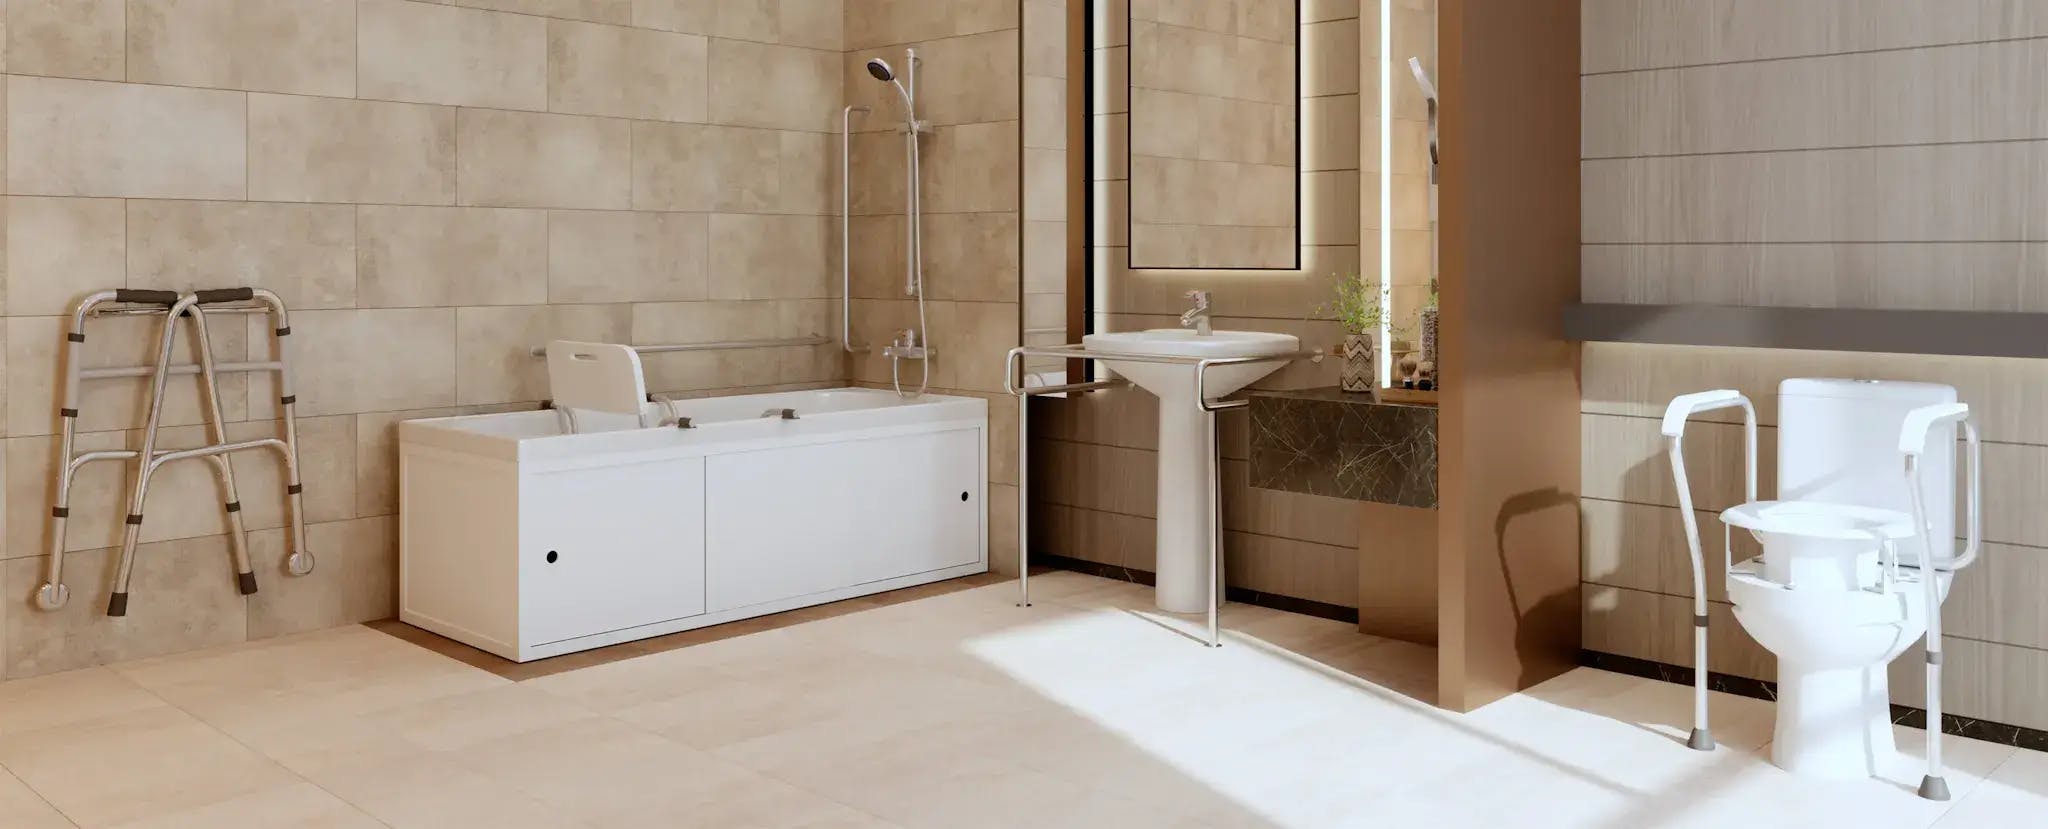 A sunlit, modern bathroom with cream-coloured tiles throughout. On the left, there is a walking assist device. Beside this is a bath and shower with a sliding seat and various bars for gripping. Centred is a sink with handlebars and space beneath for chair access. Above the sink is a mirror, well-lit from both sides. On the right, there is a toilet with side arms and vertically adjustable seat.